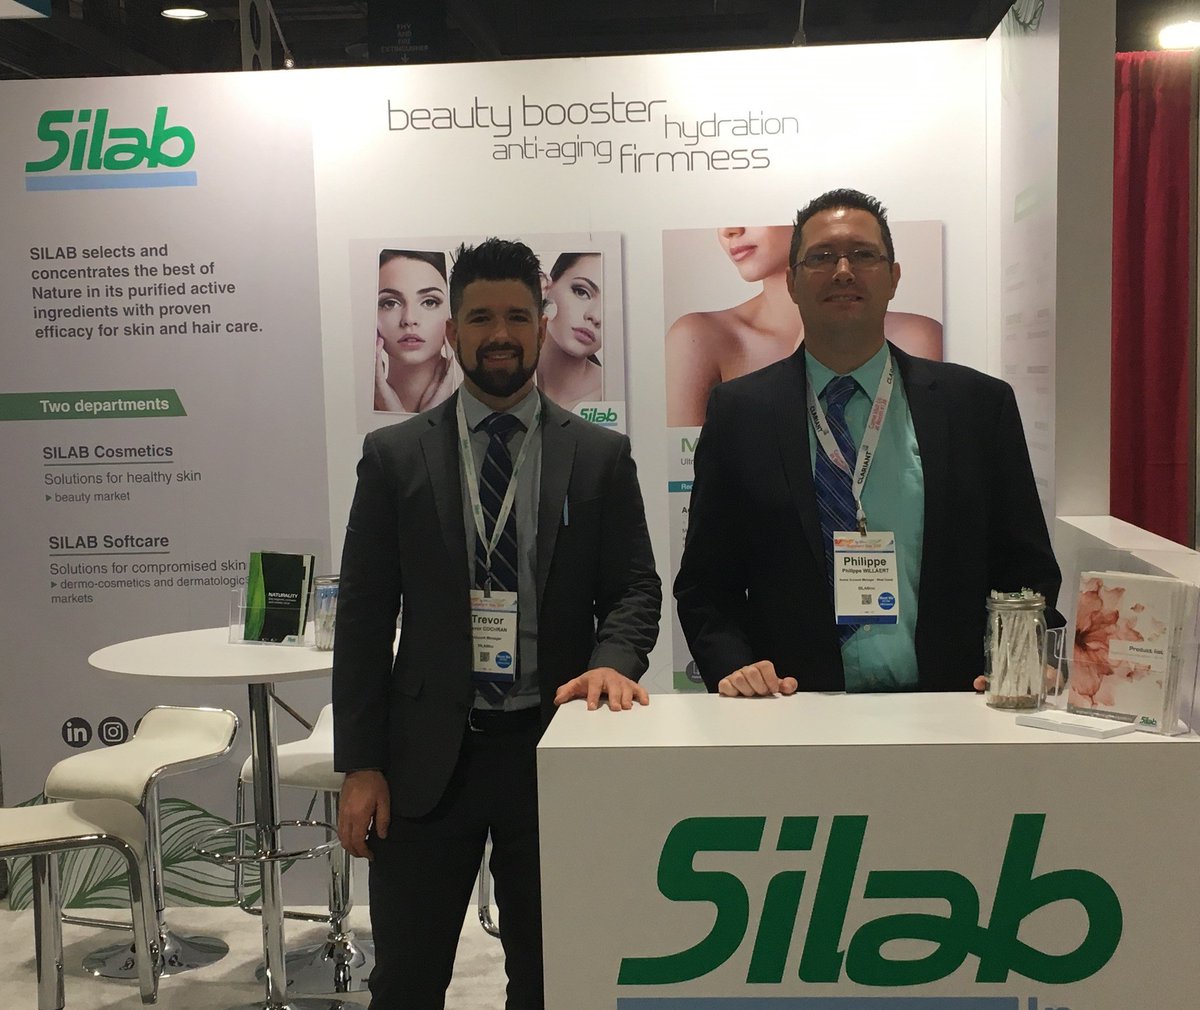 SILAB Inc. is ready to welcome you on the booth 740 during the California Suppliers’ Day!